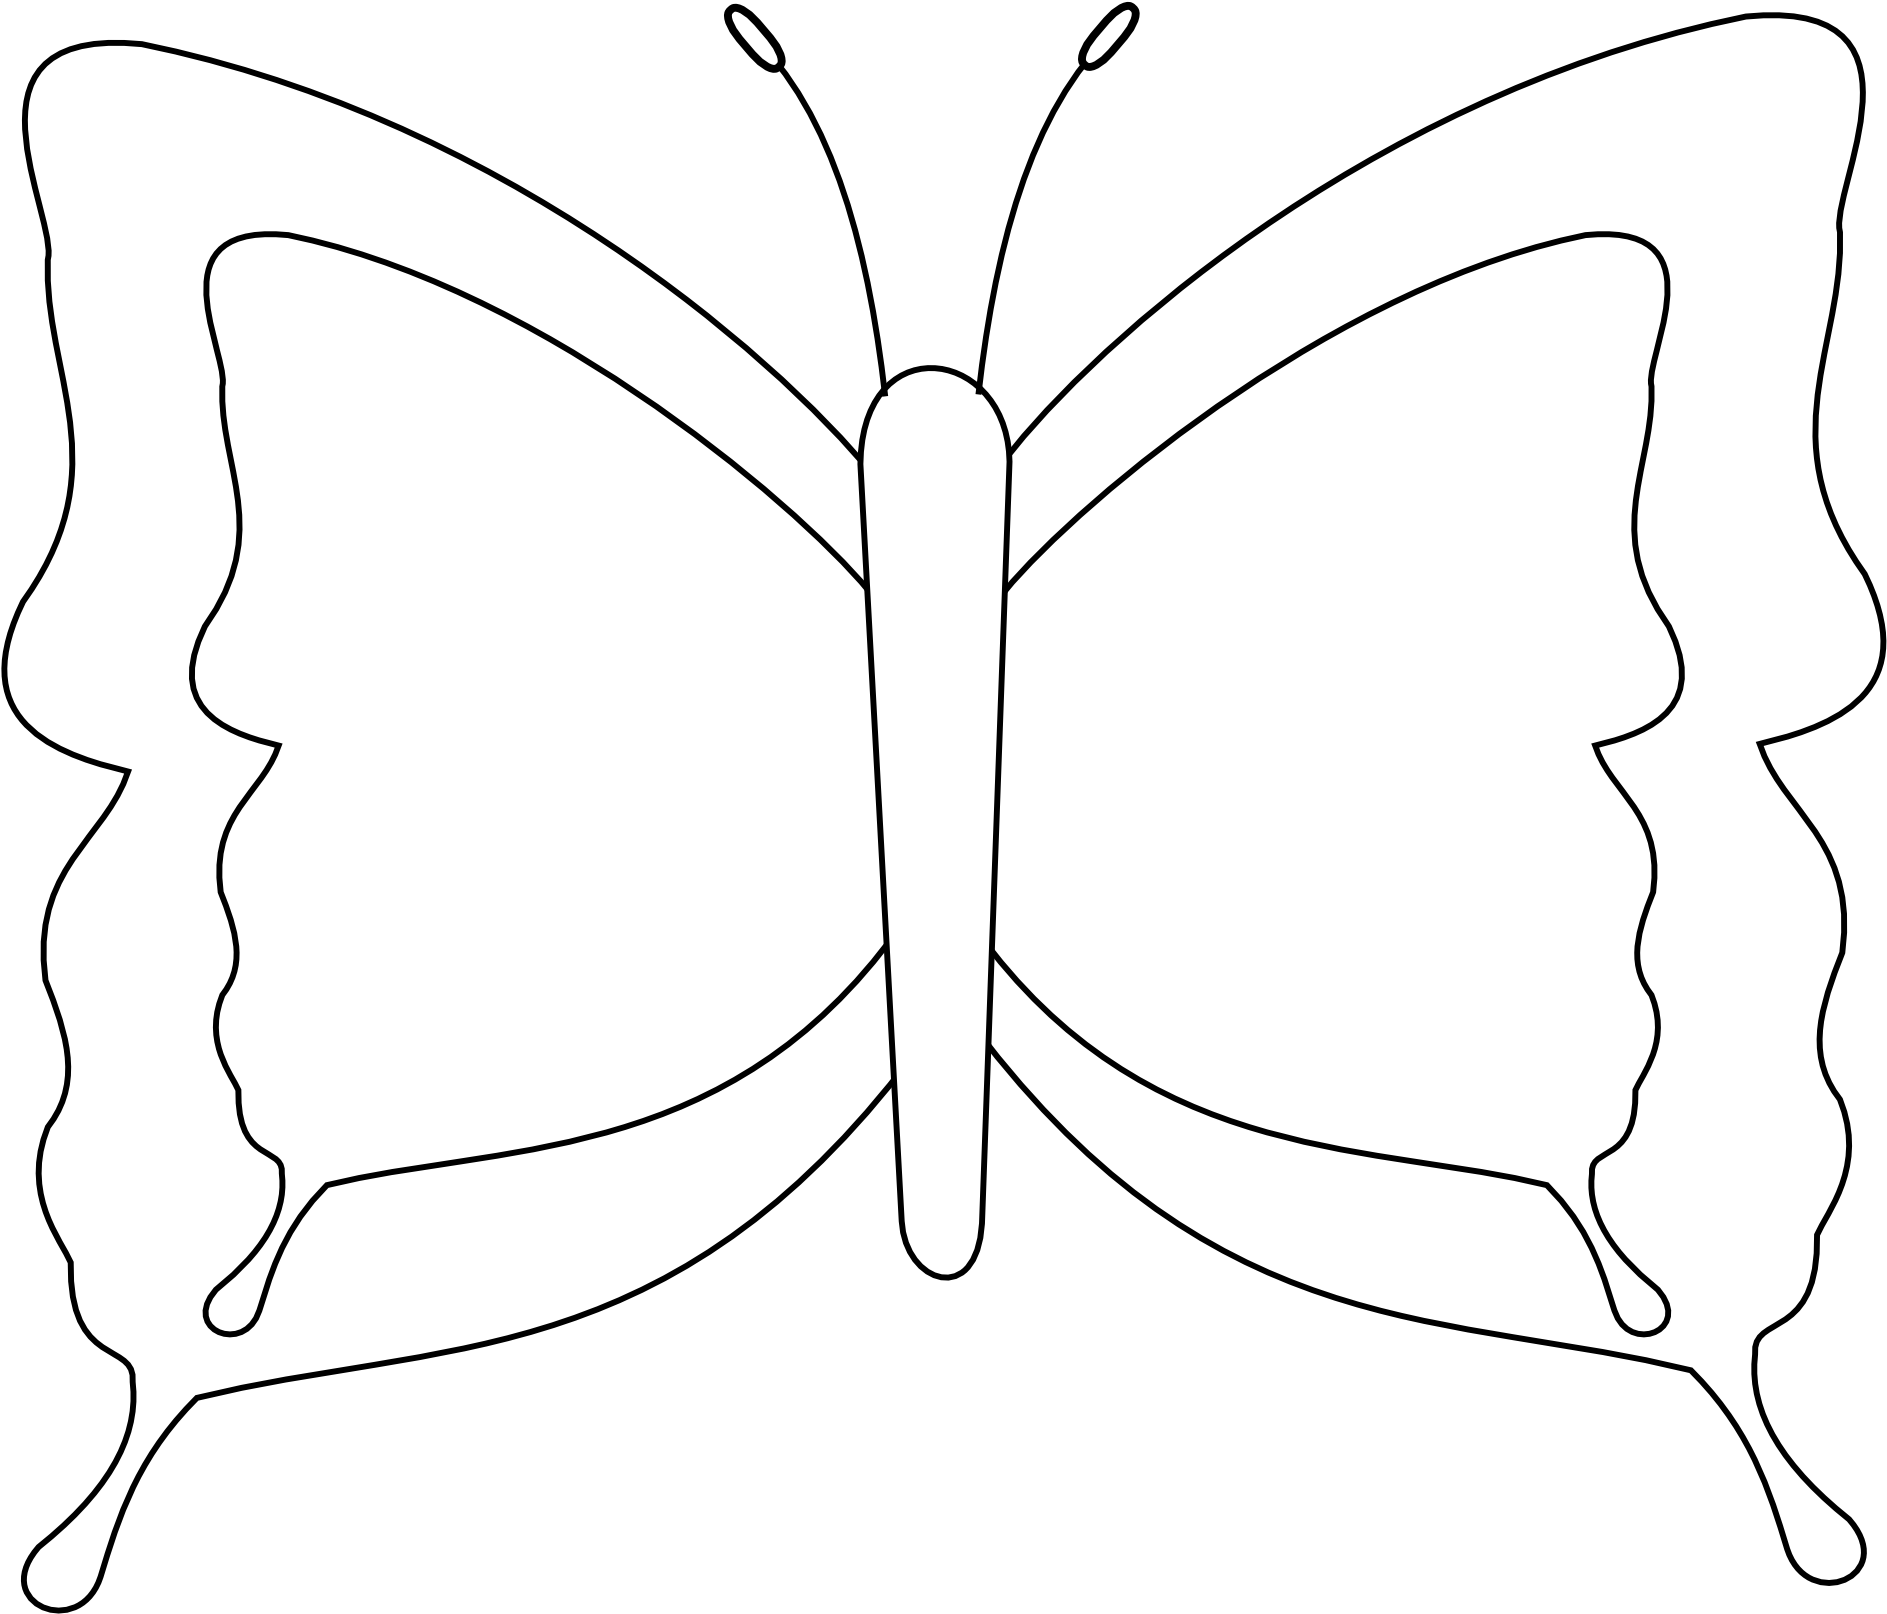 Monochrome_ Butterfly_ Outline PNG image